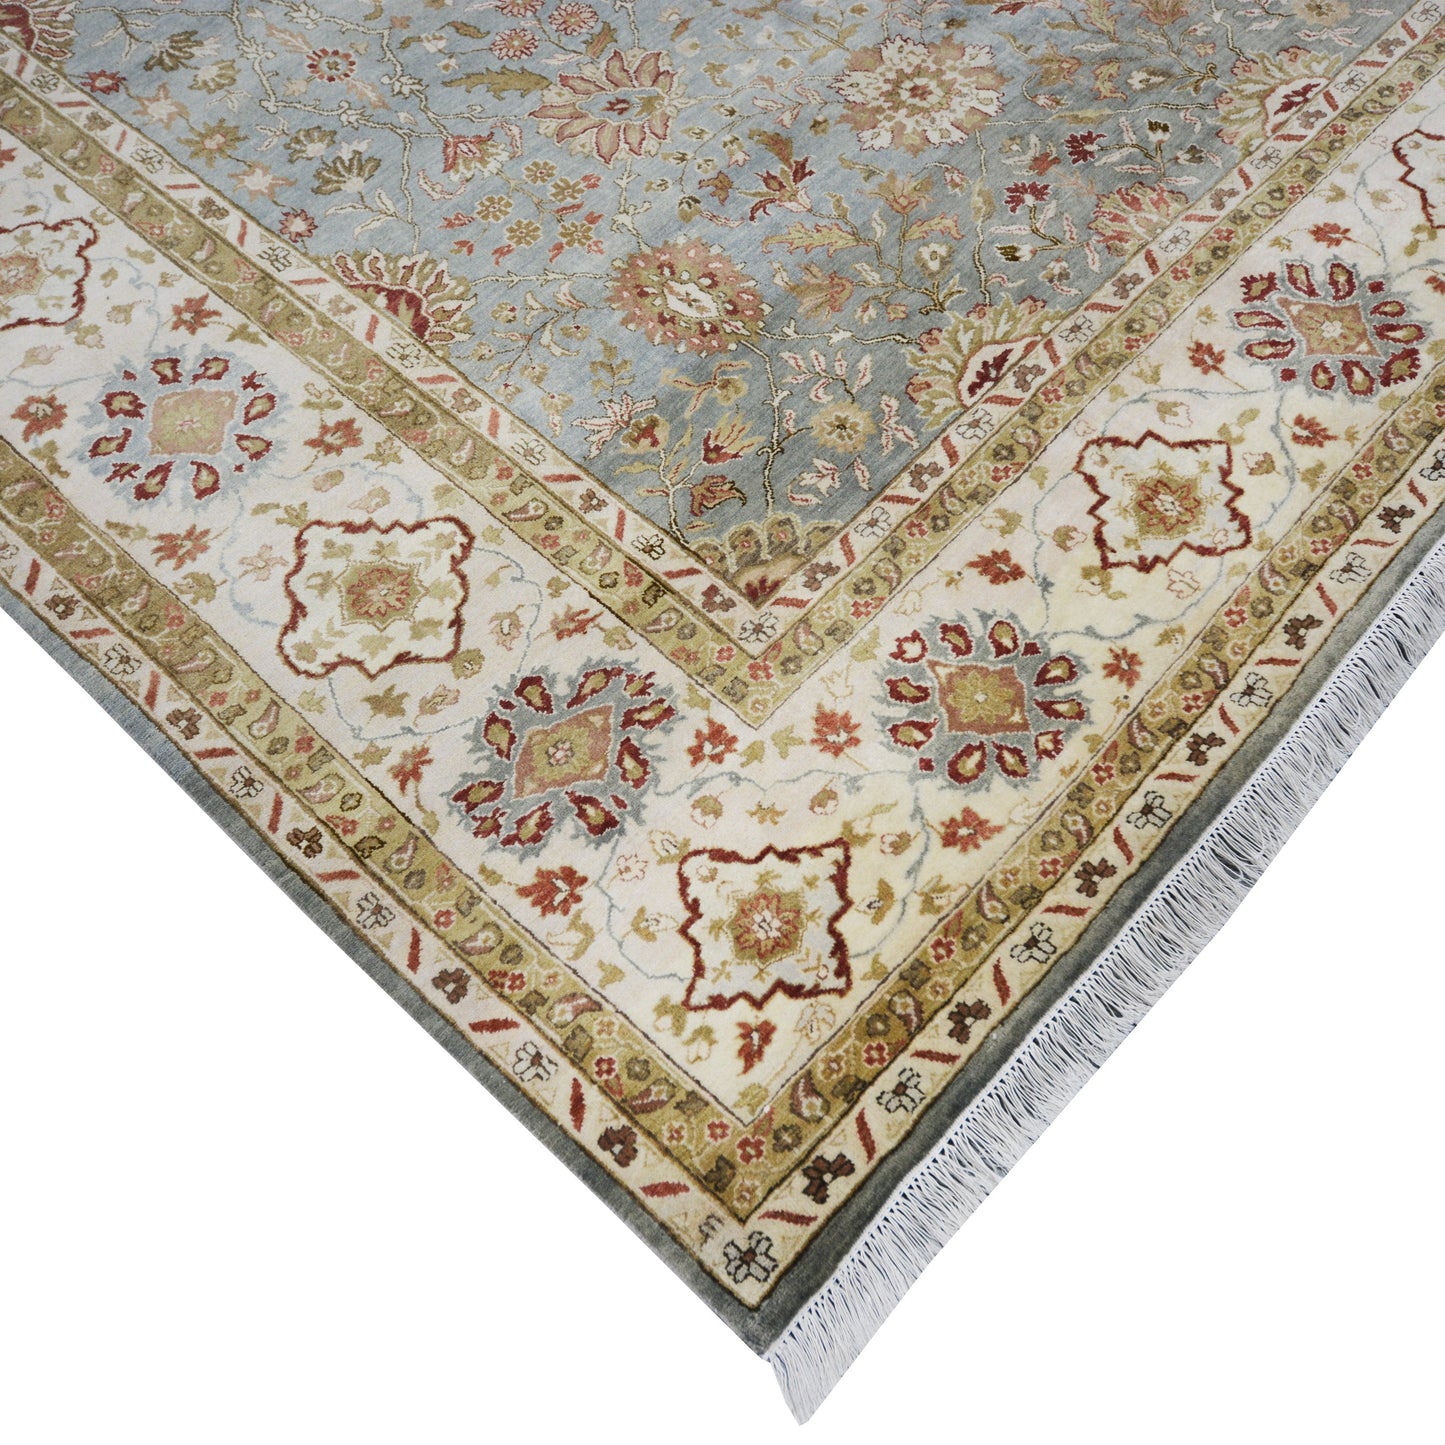 Get trendy with Floral Light Blue, Brown, Ivory and Red Traditional Pure Wool Jaipur Handknotted Area Rug - Contemporary Rugs available at Jaipur Oriental Rugs. Grab yours for $3175.00 today!